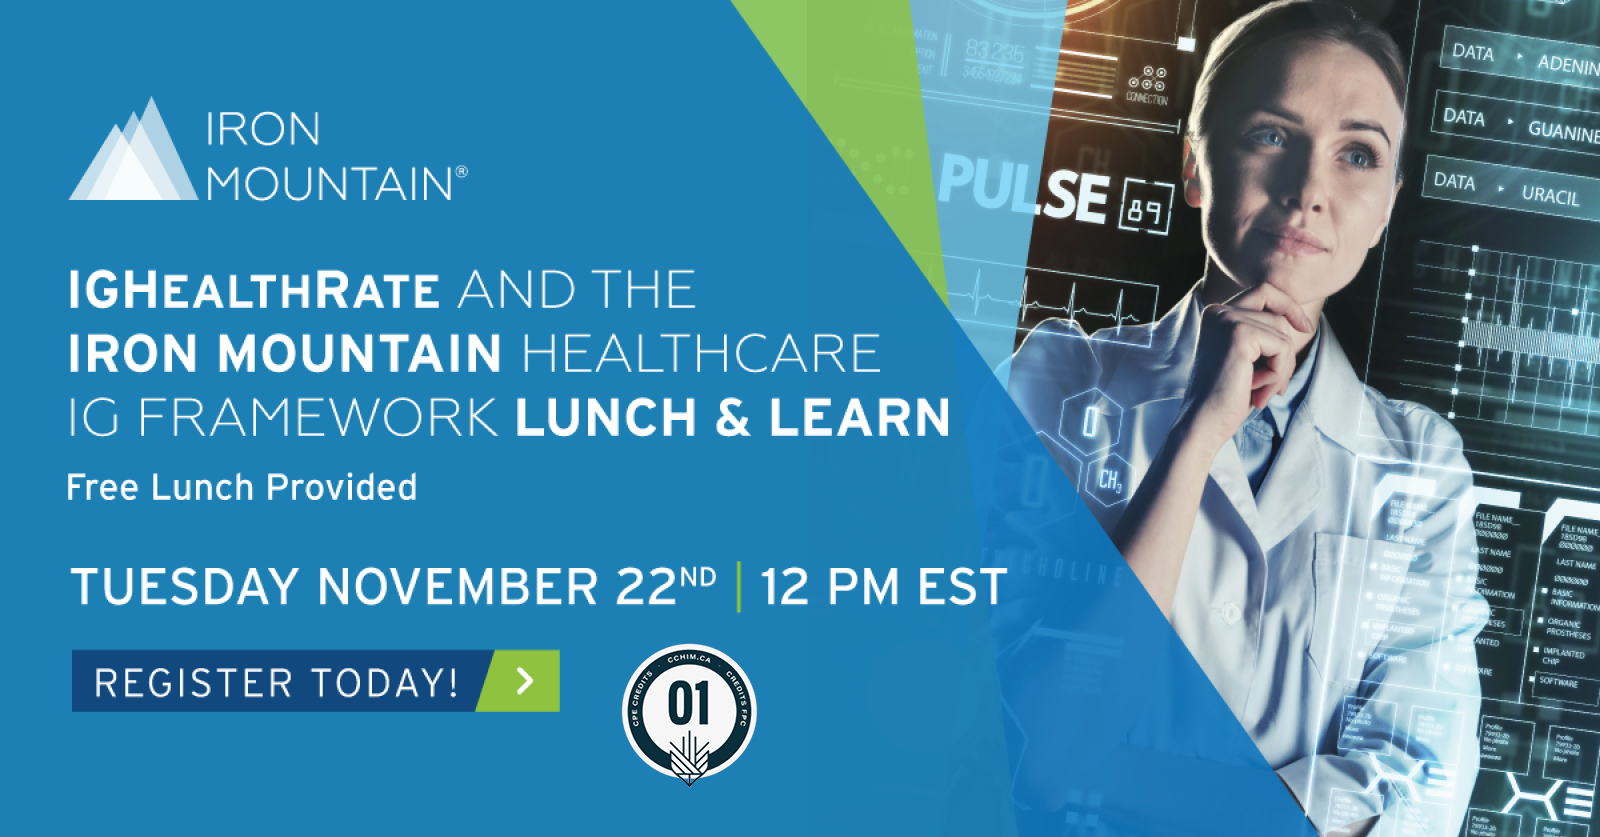 Banner for Iron Mountain Lunch and Learn titles IGHealthRate and the Iron Mountain Healthcare IG framework. Free lunch provided. Tuesday November 22 at 12:00 pm ET Register today.